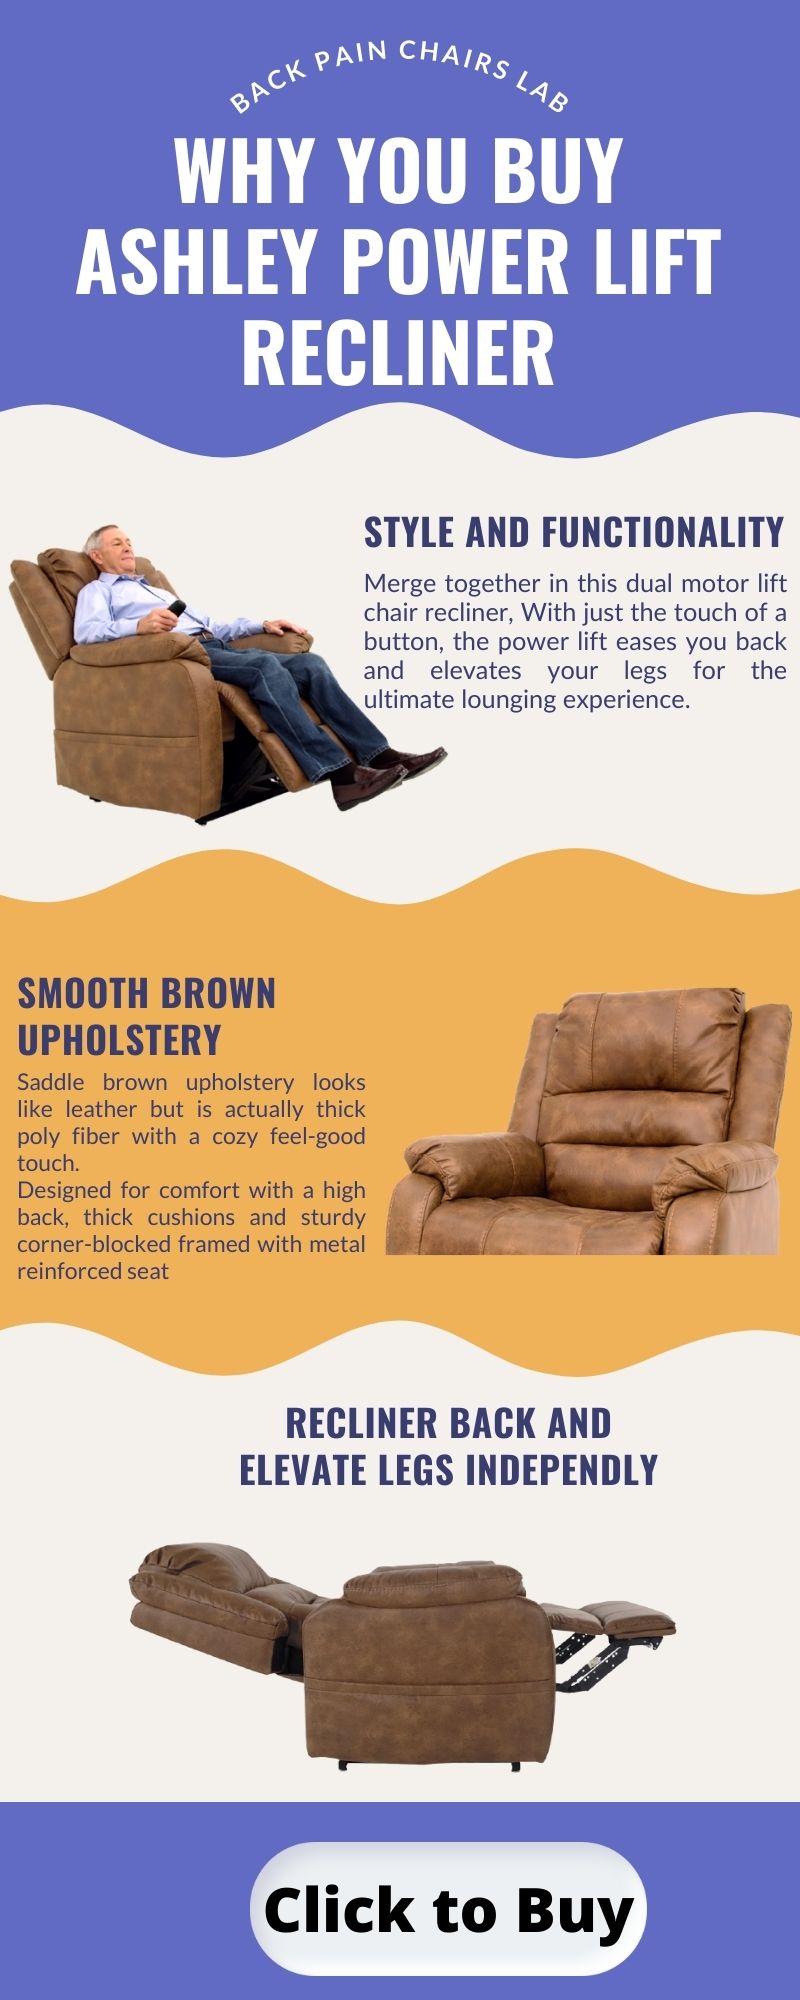 Why You Buy Ashley Power Lift Recliner